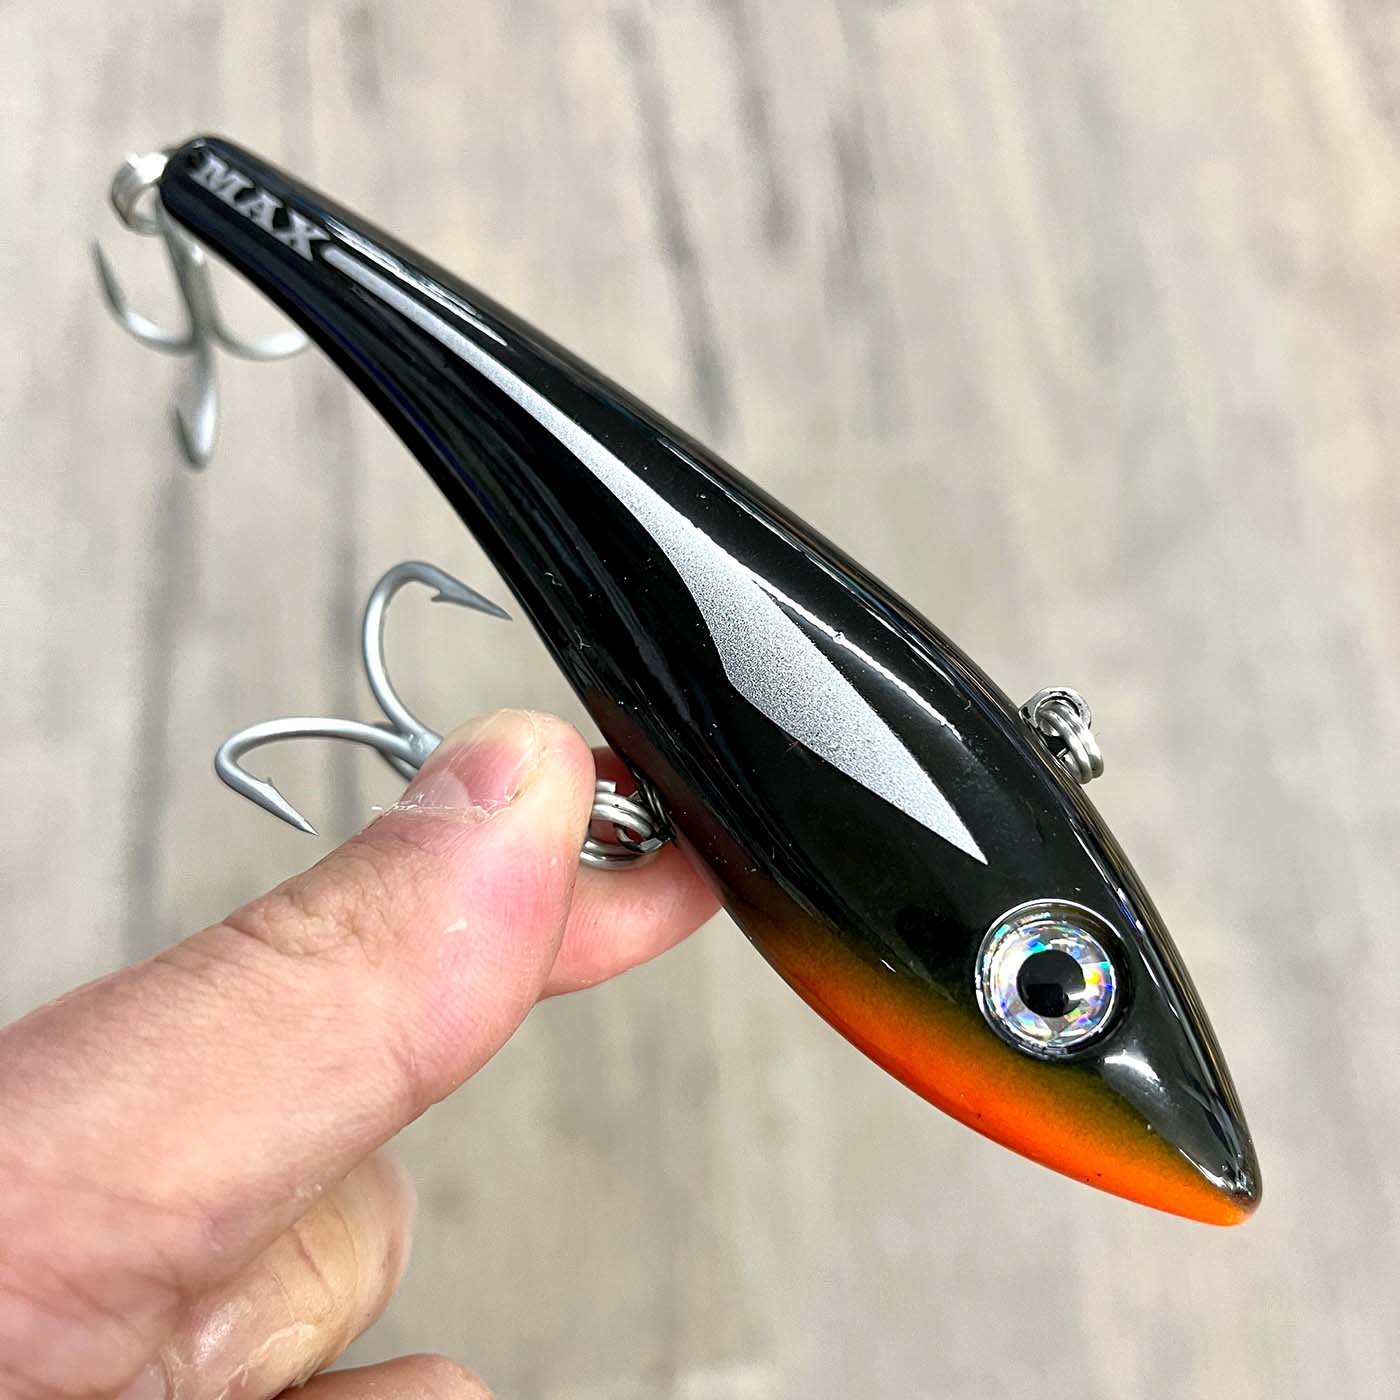 Halco Max 130 Midnight Fish - Compleat Angler Nedlands Pro Tackle